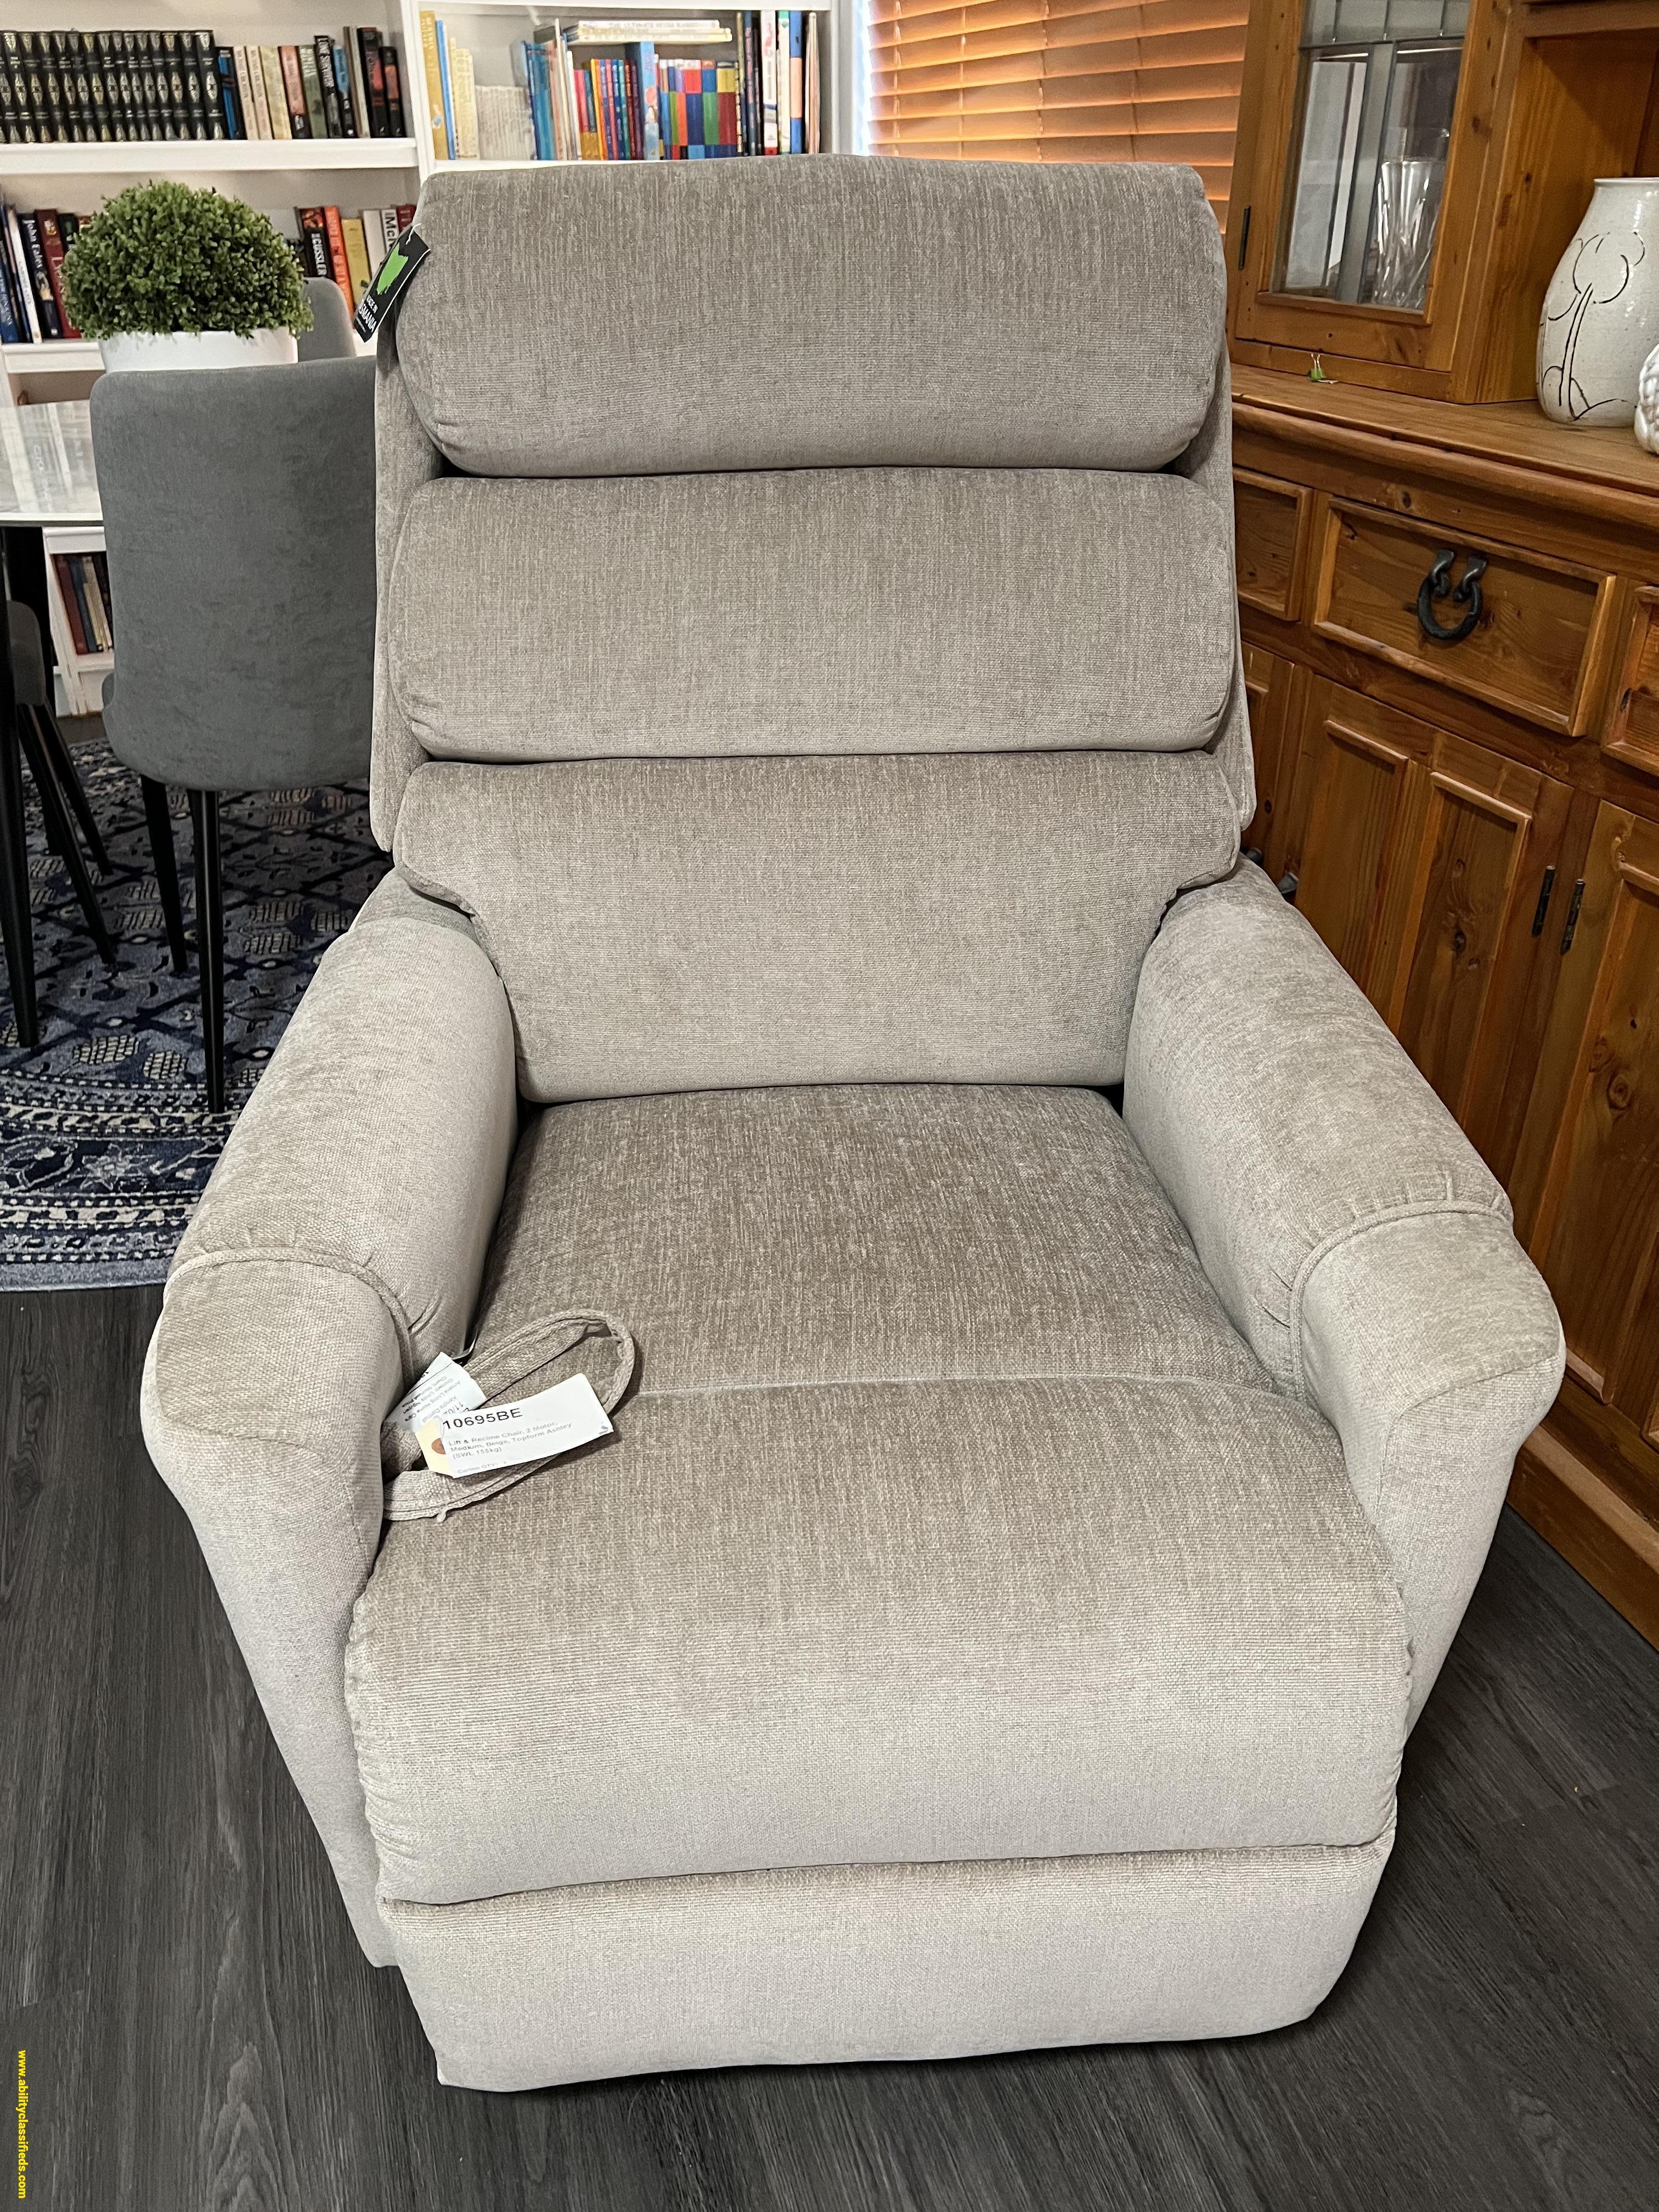 Lift and Recline Chair for Sale